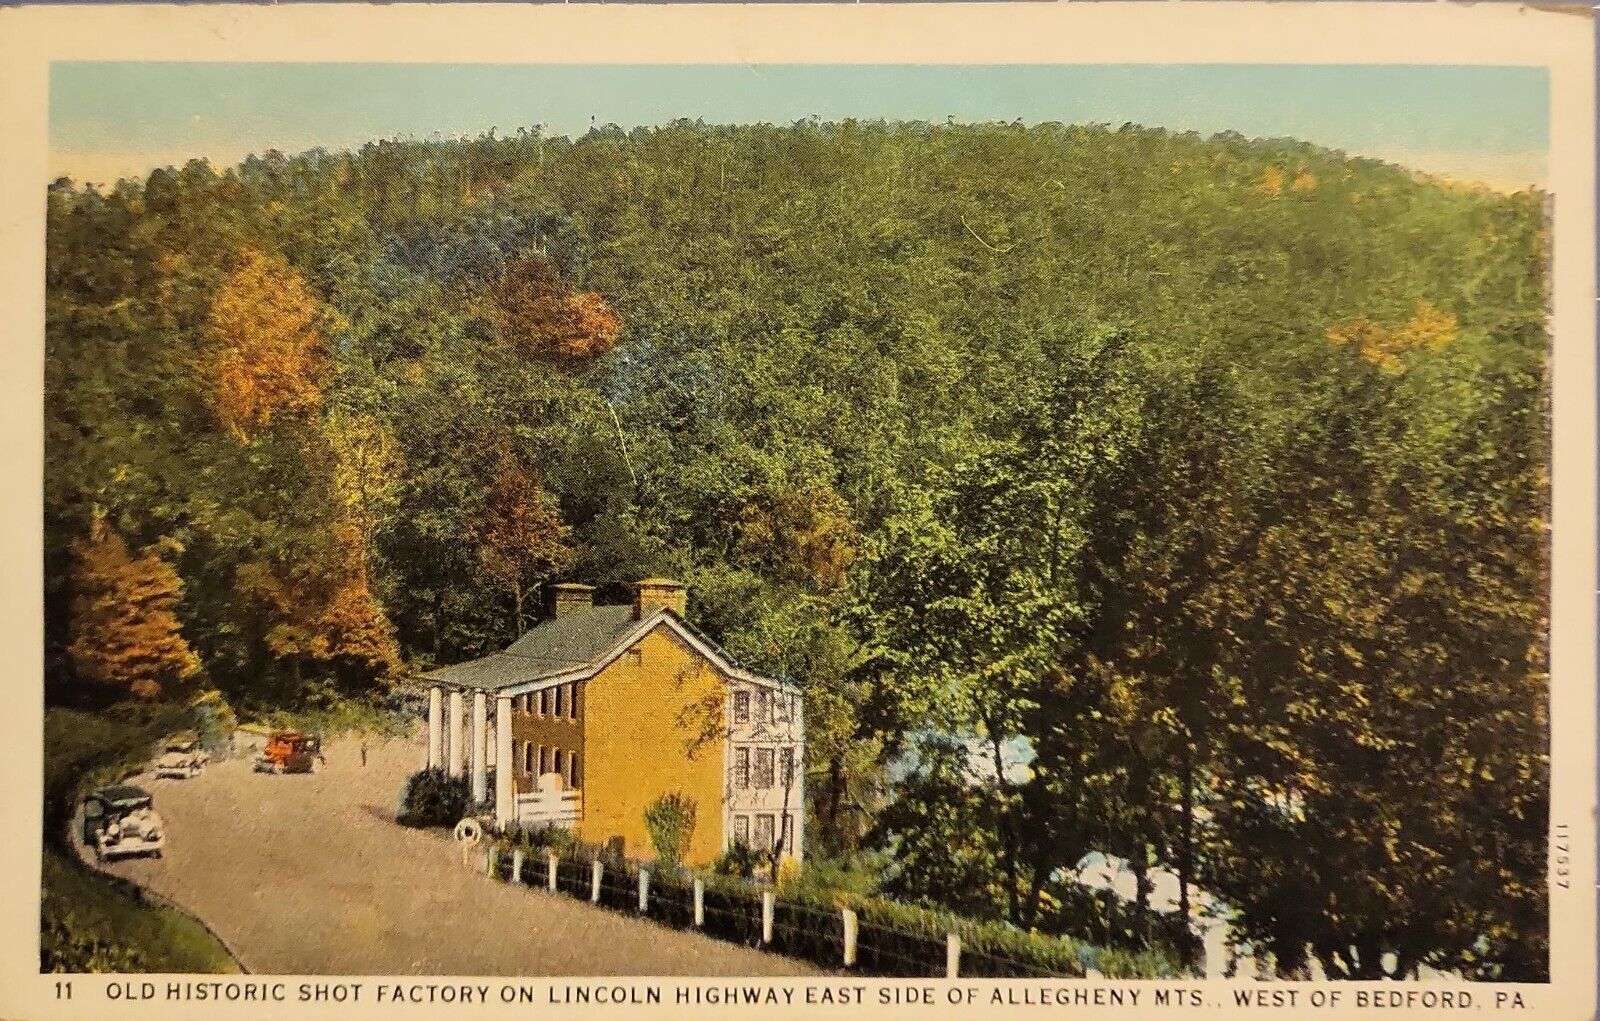 Shot Factory - Vintage Postcard - West Of Bedford PA, Lincoln Hwy East